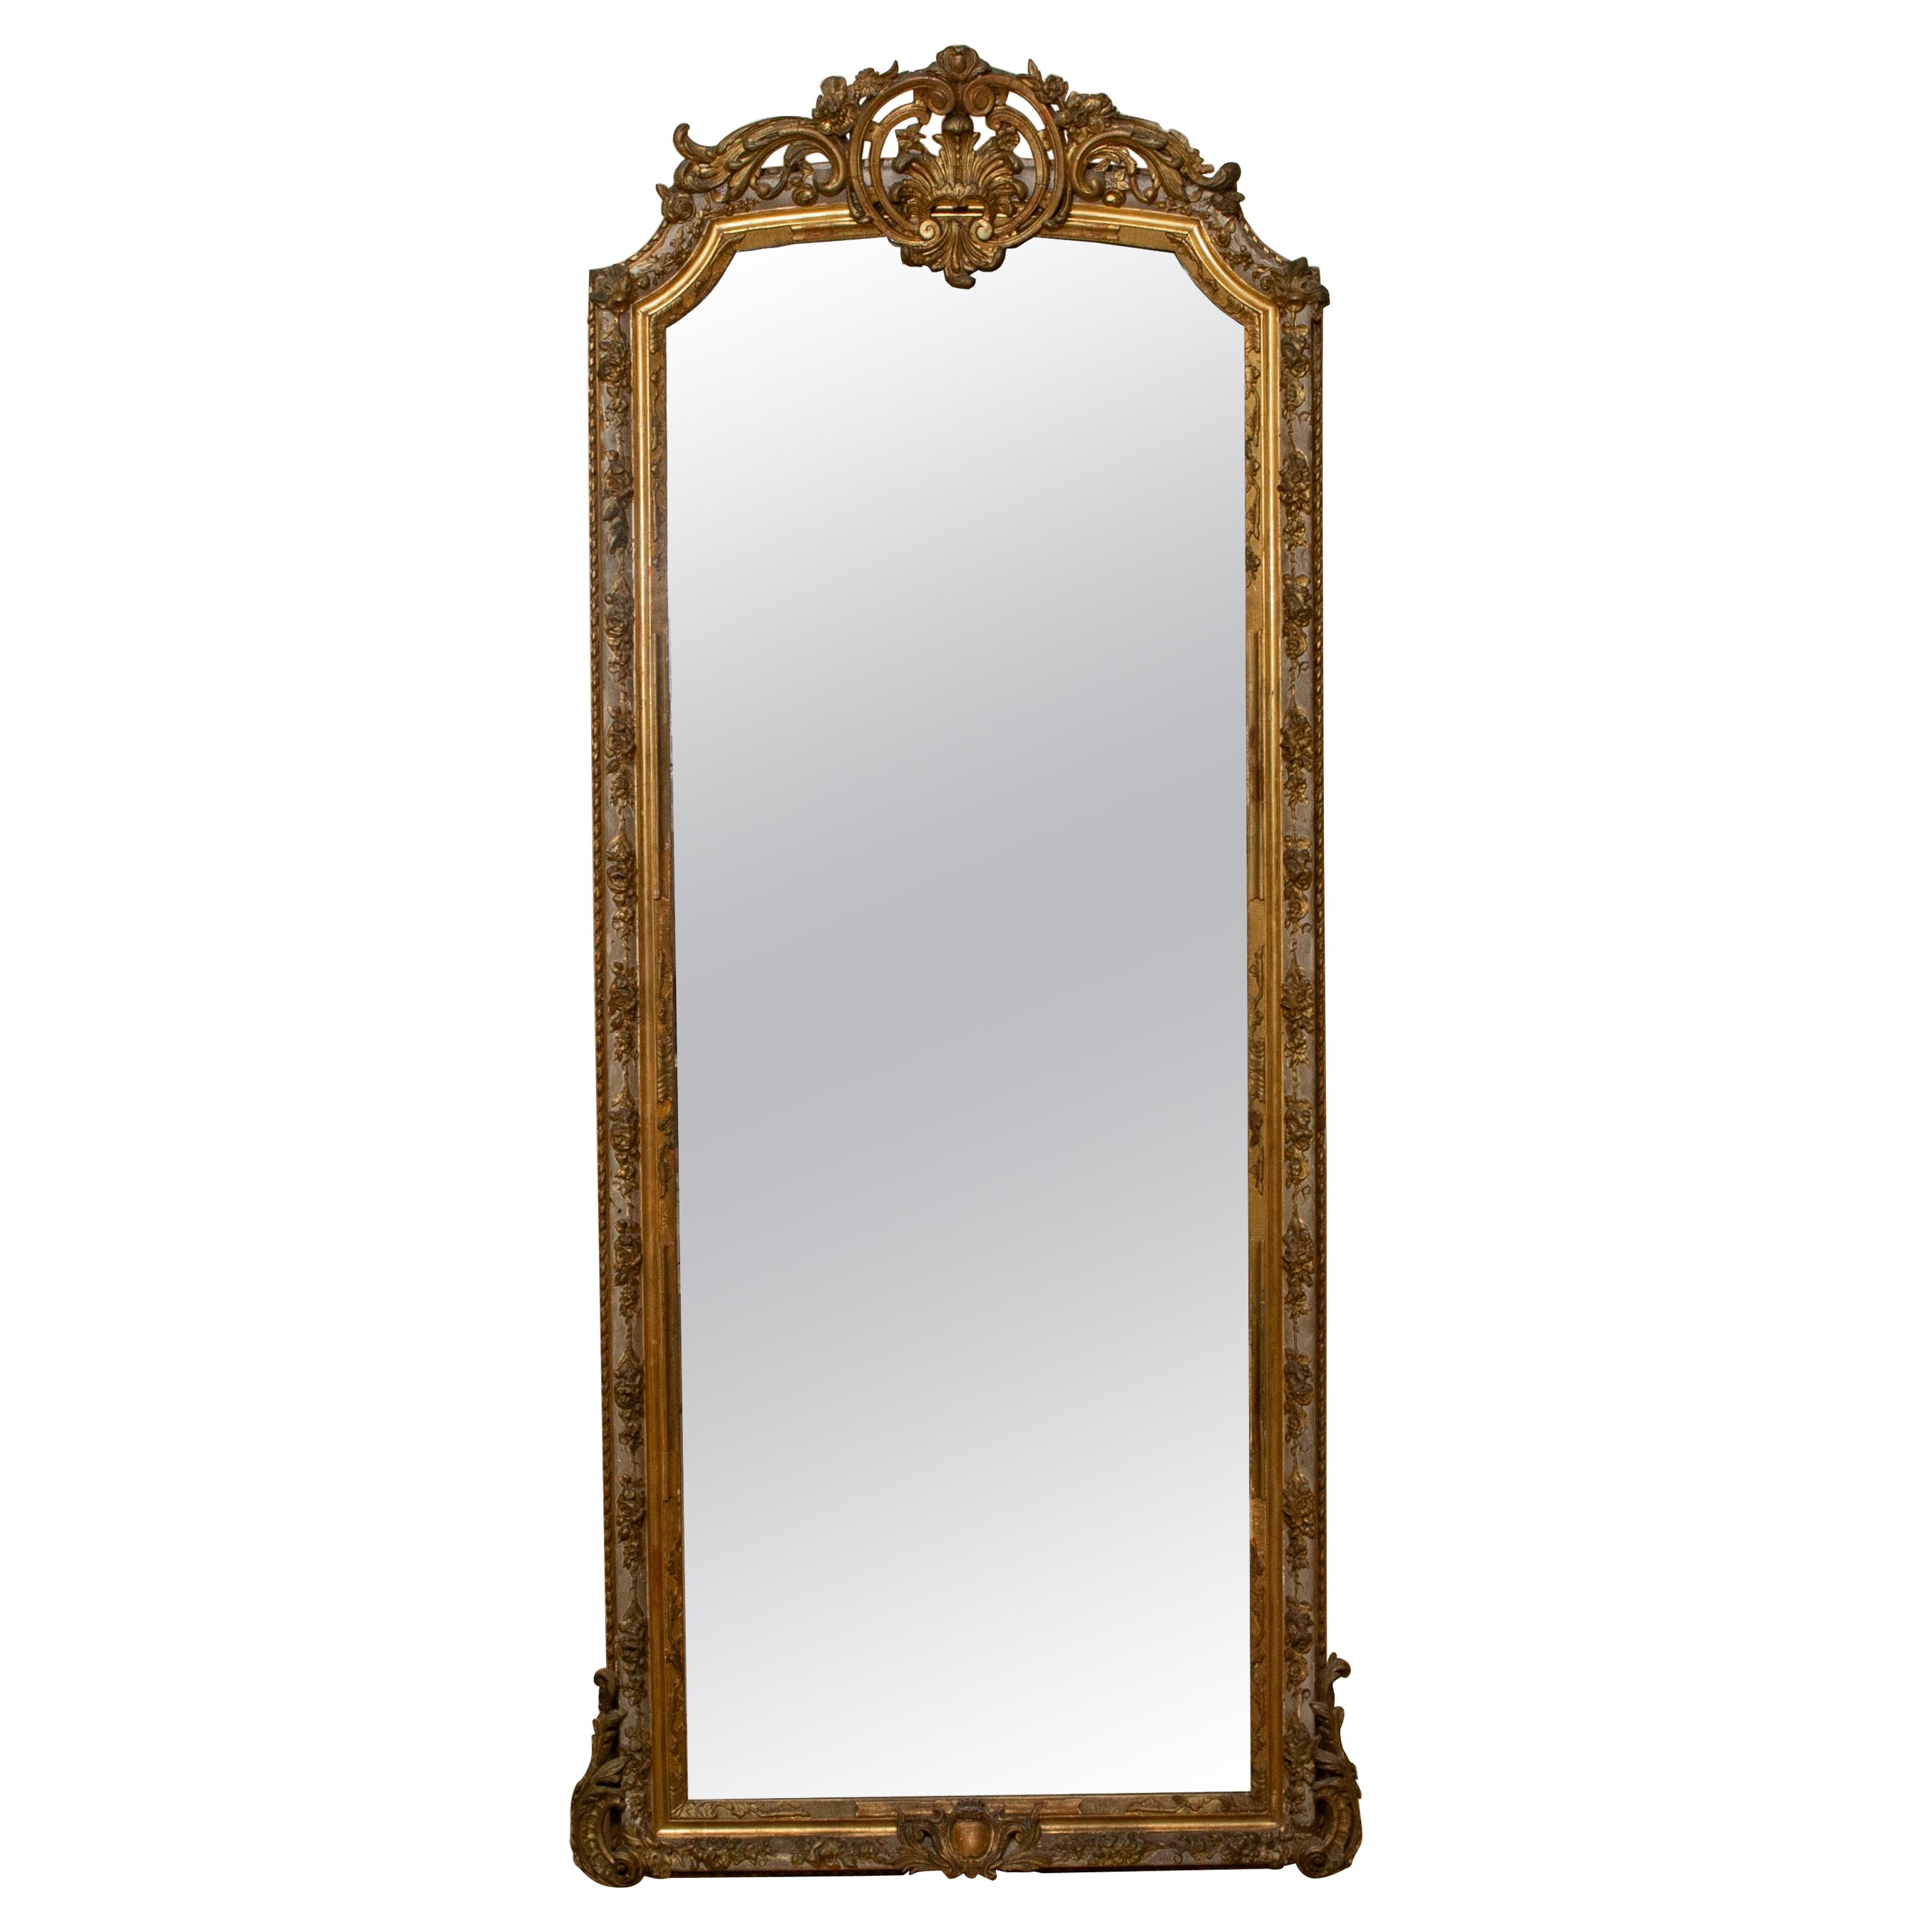 Mid-19th Century French Regency Style Gilt Wood Full Length Mirror, 87-in Tall